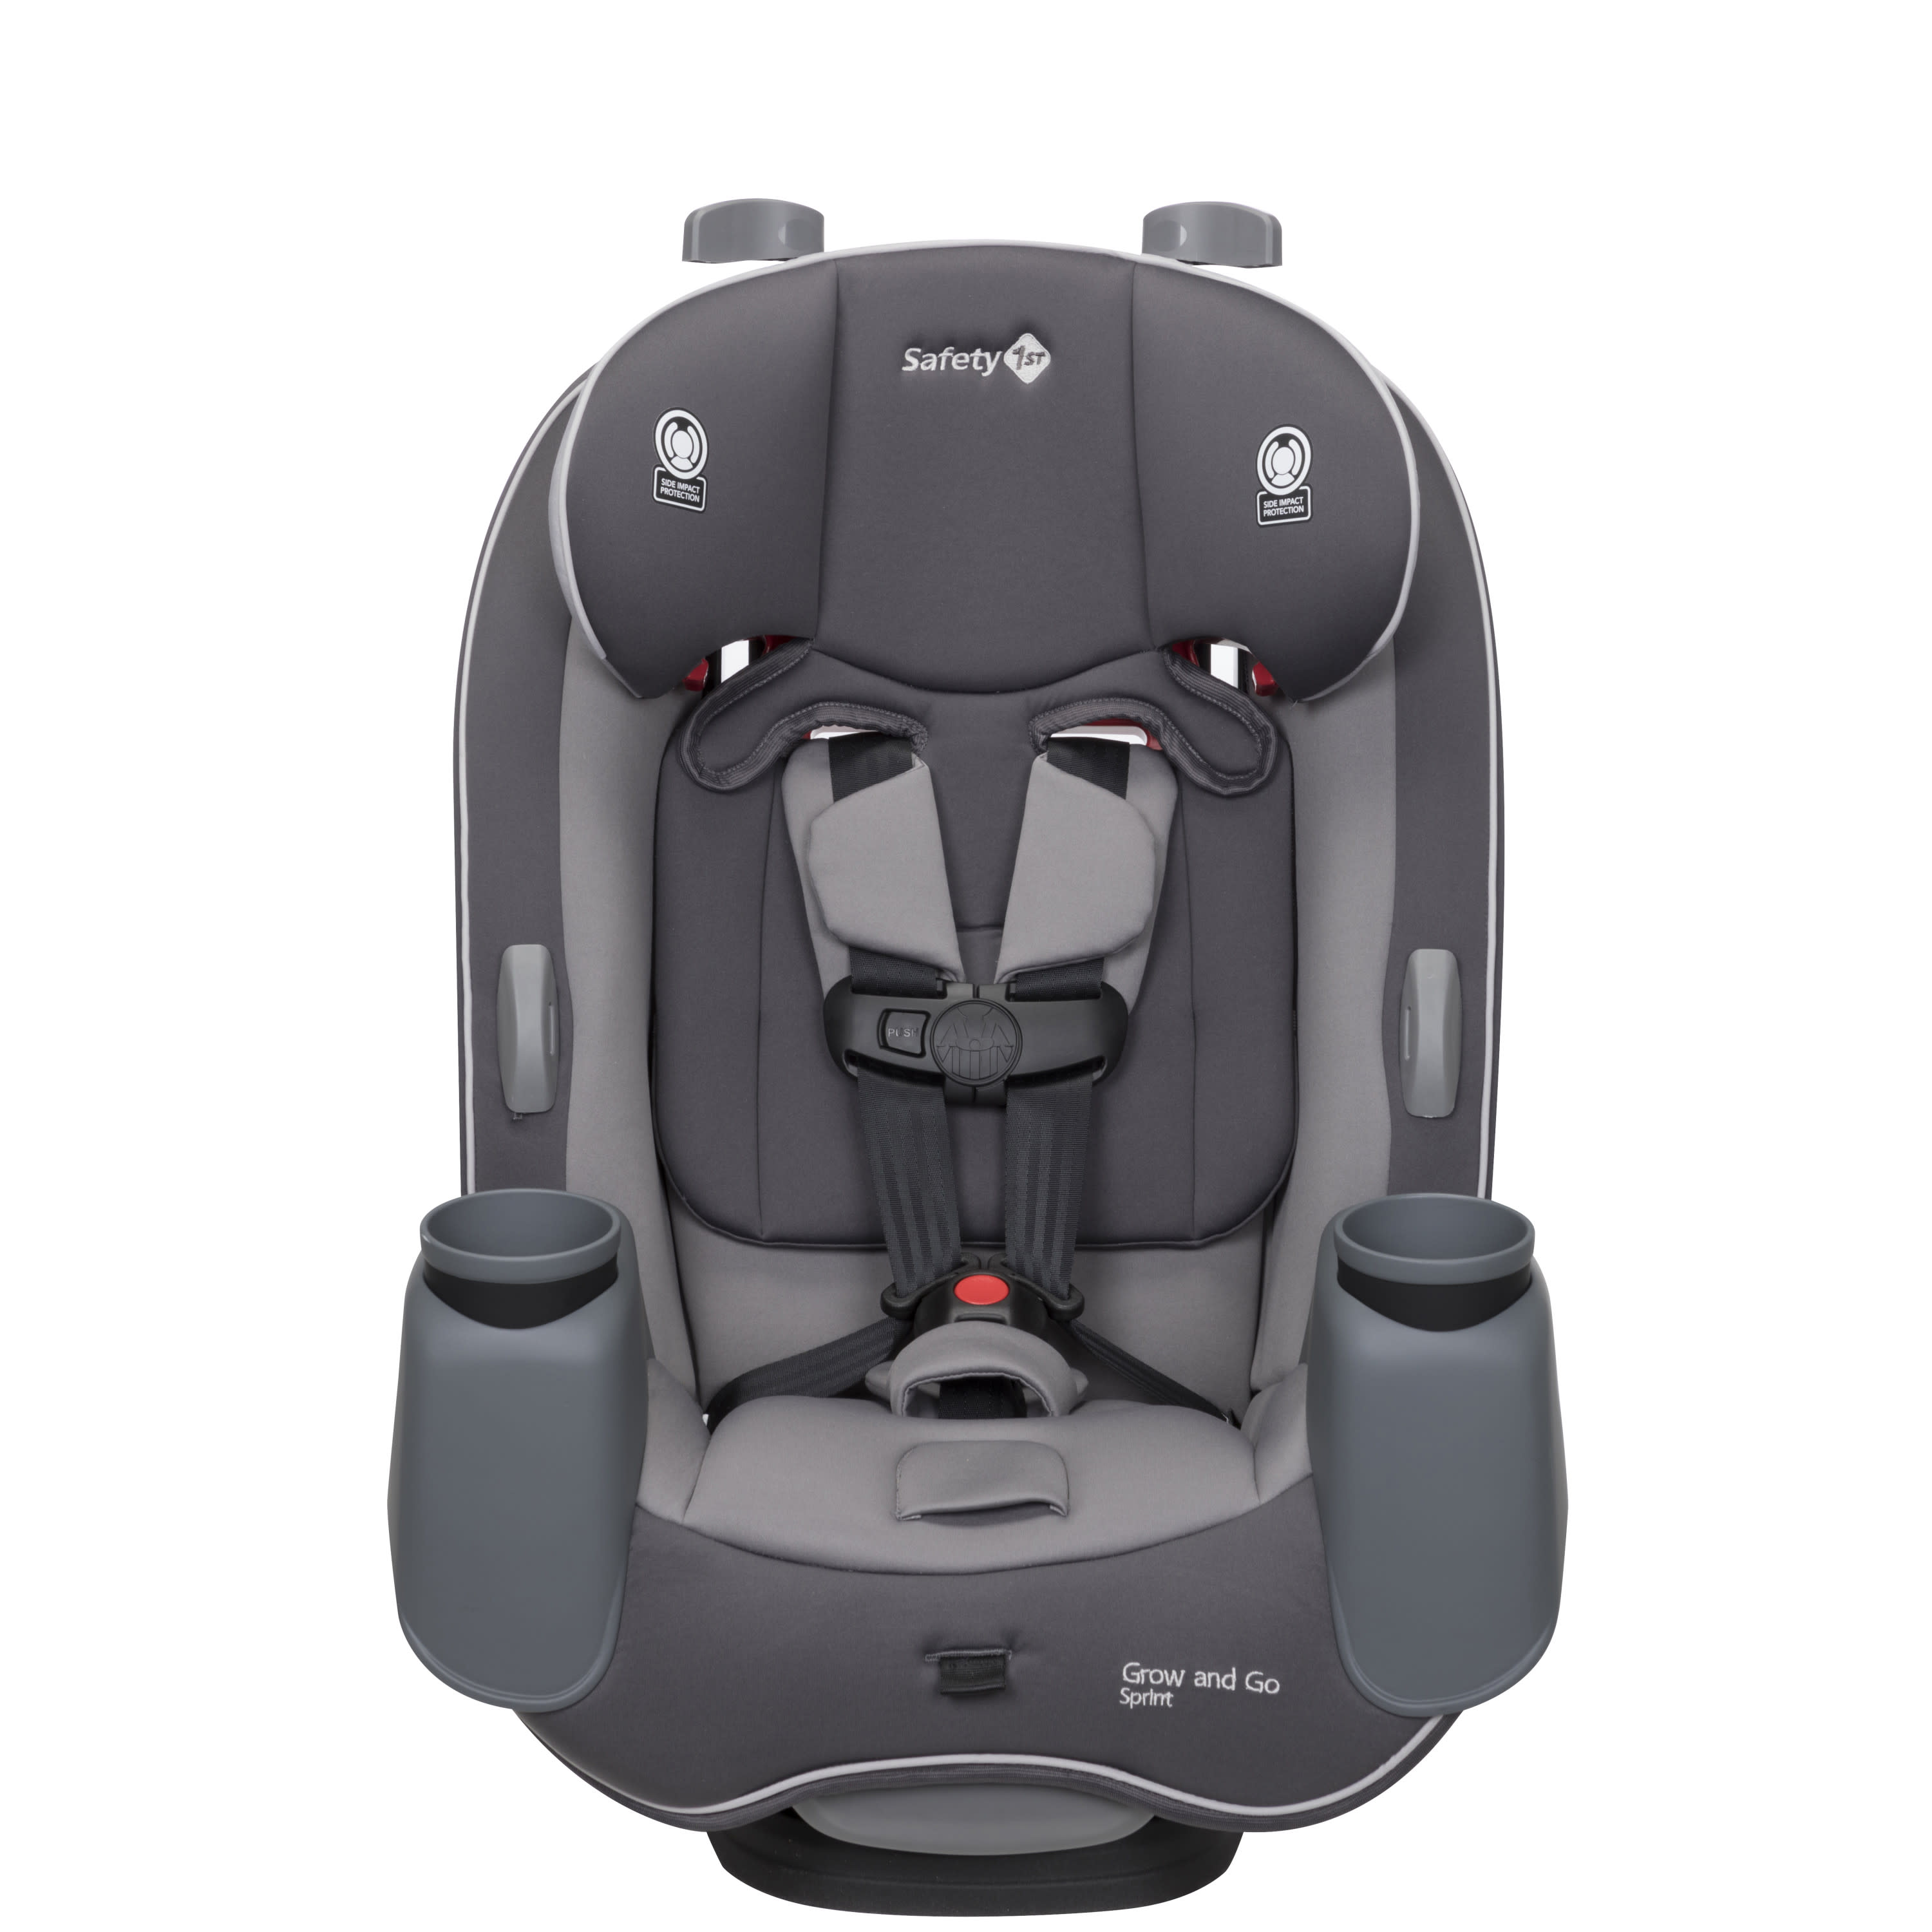 Safety 1st Grow and Go Sprint All-in-1 Convertible Car Seat, Silver Lake - image 2 of 26